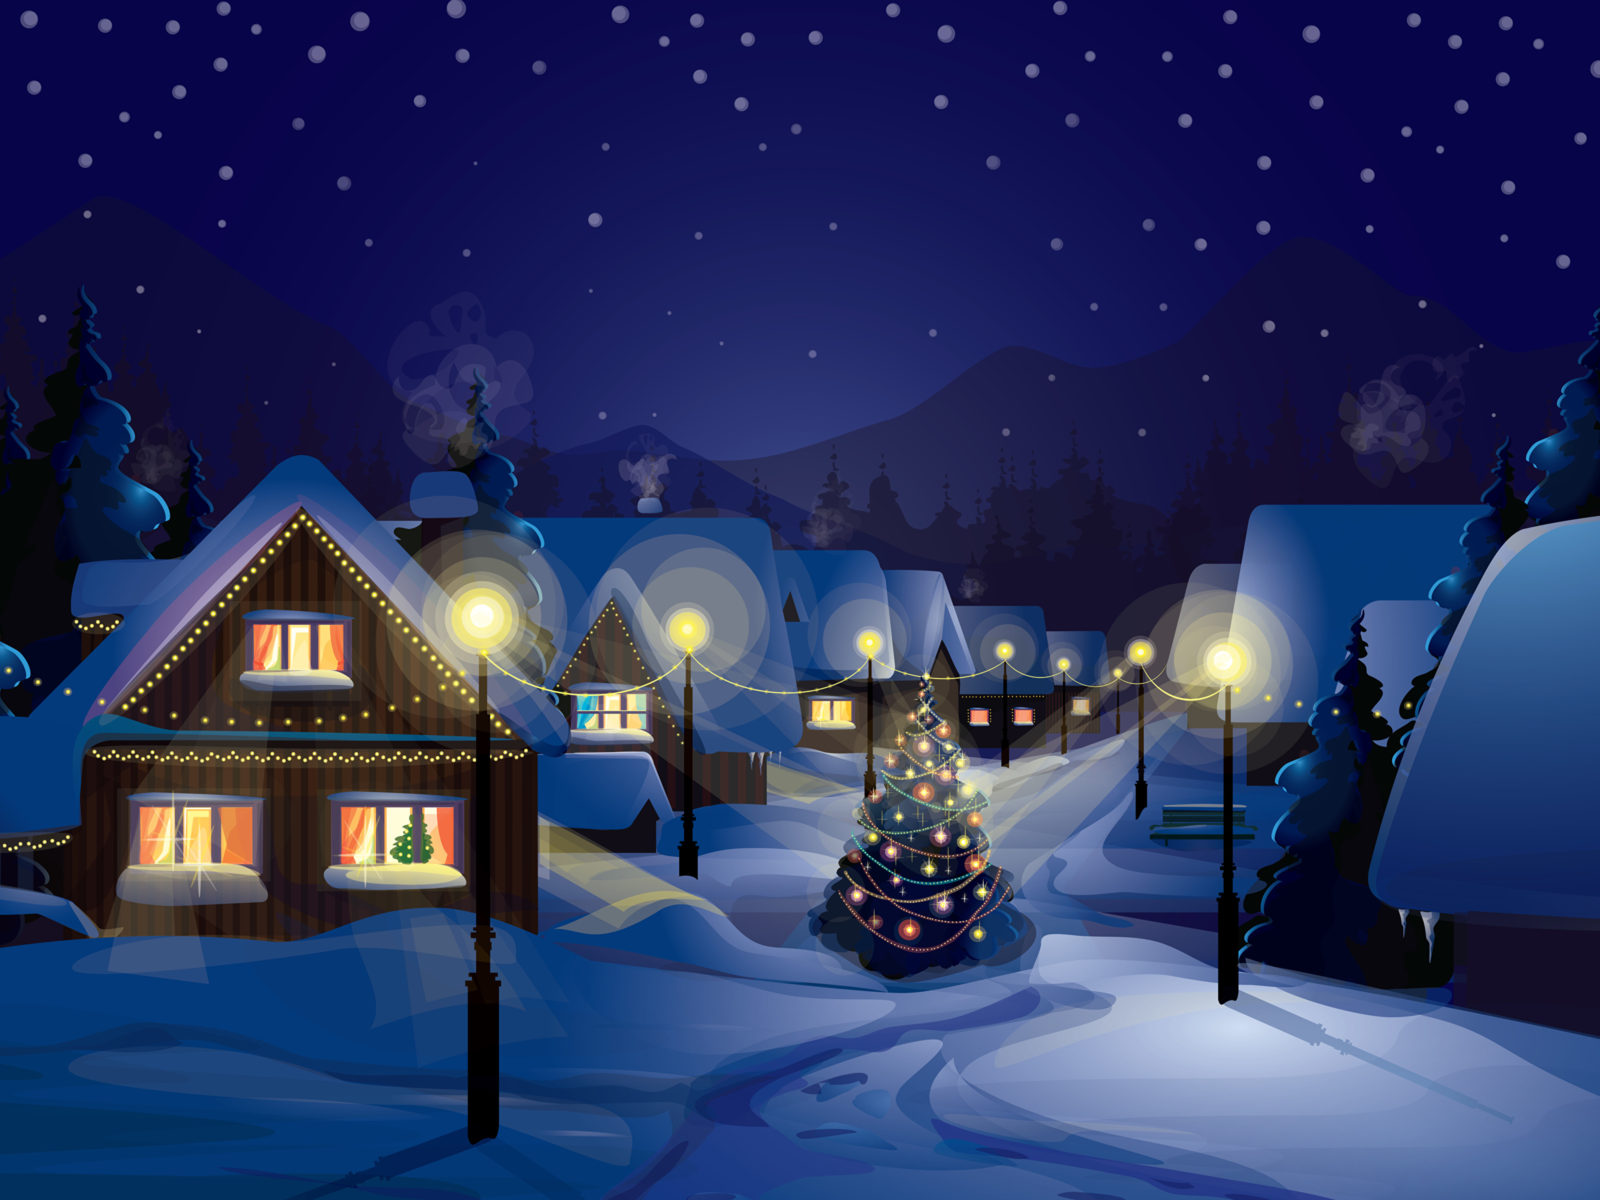 Christmas Night Village In Snowy Christmas Wallpapers Hd : Wallpapers13